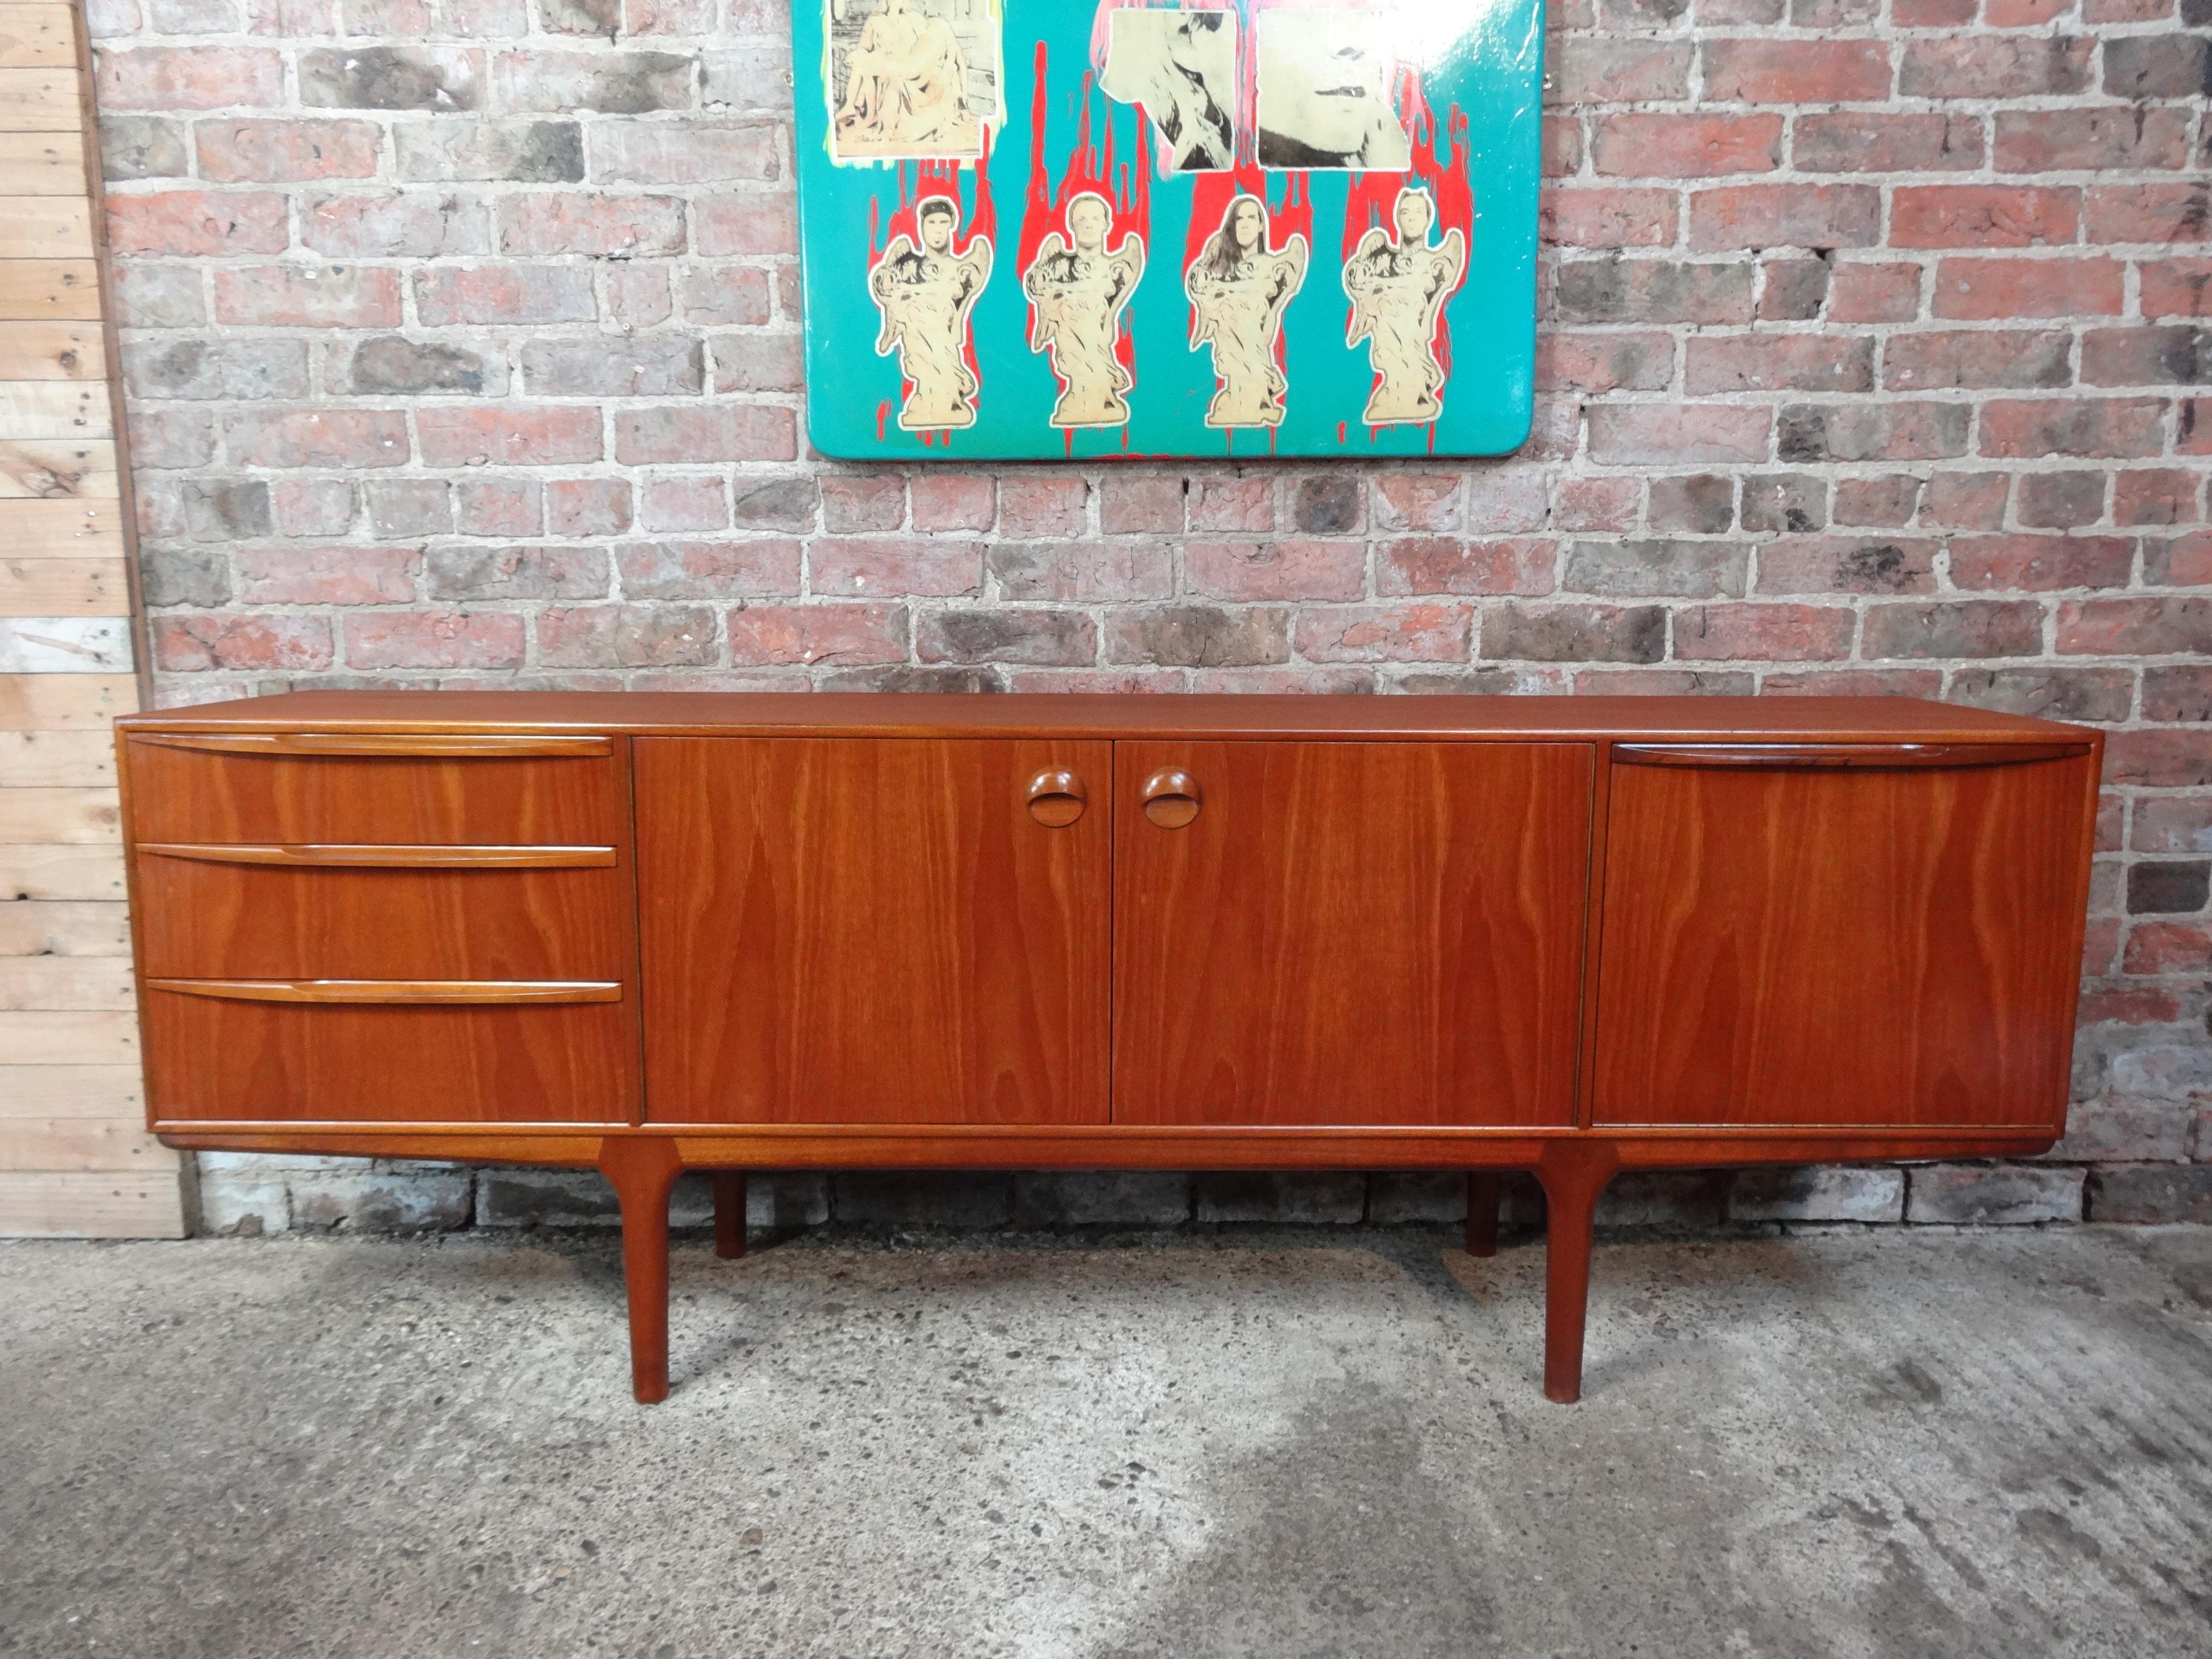 Vintage 1960s McIntosh sideboard by Tom Robertson. It has three drawers, cupboard space with lovely round handles, and a drinks section with a useful pullout shelf. Credenza is in very good original condition.